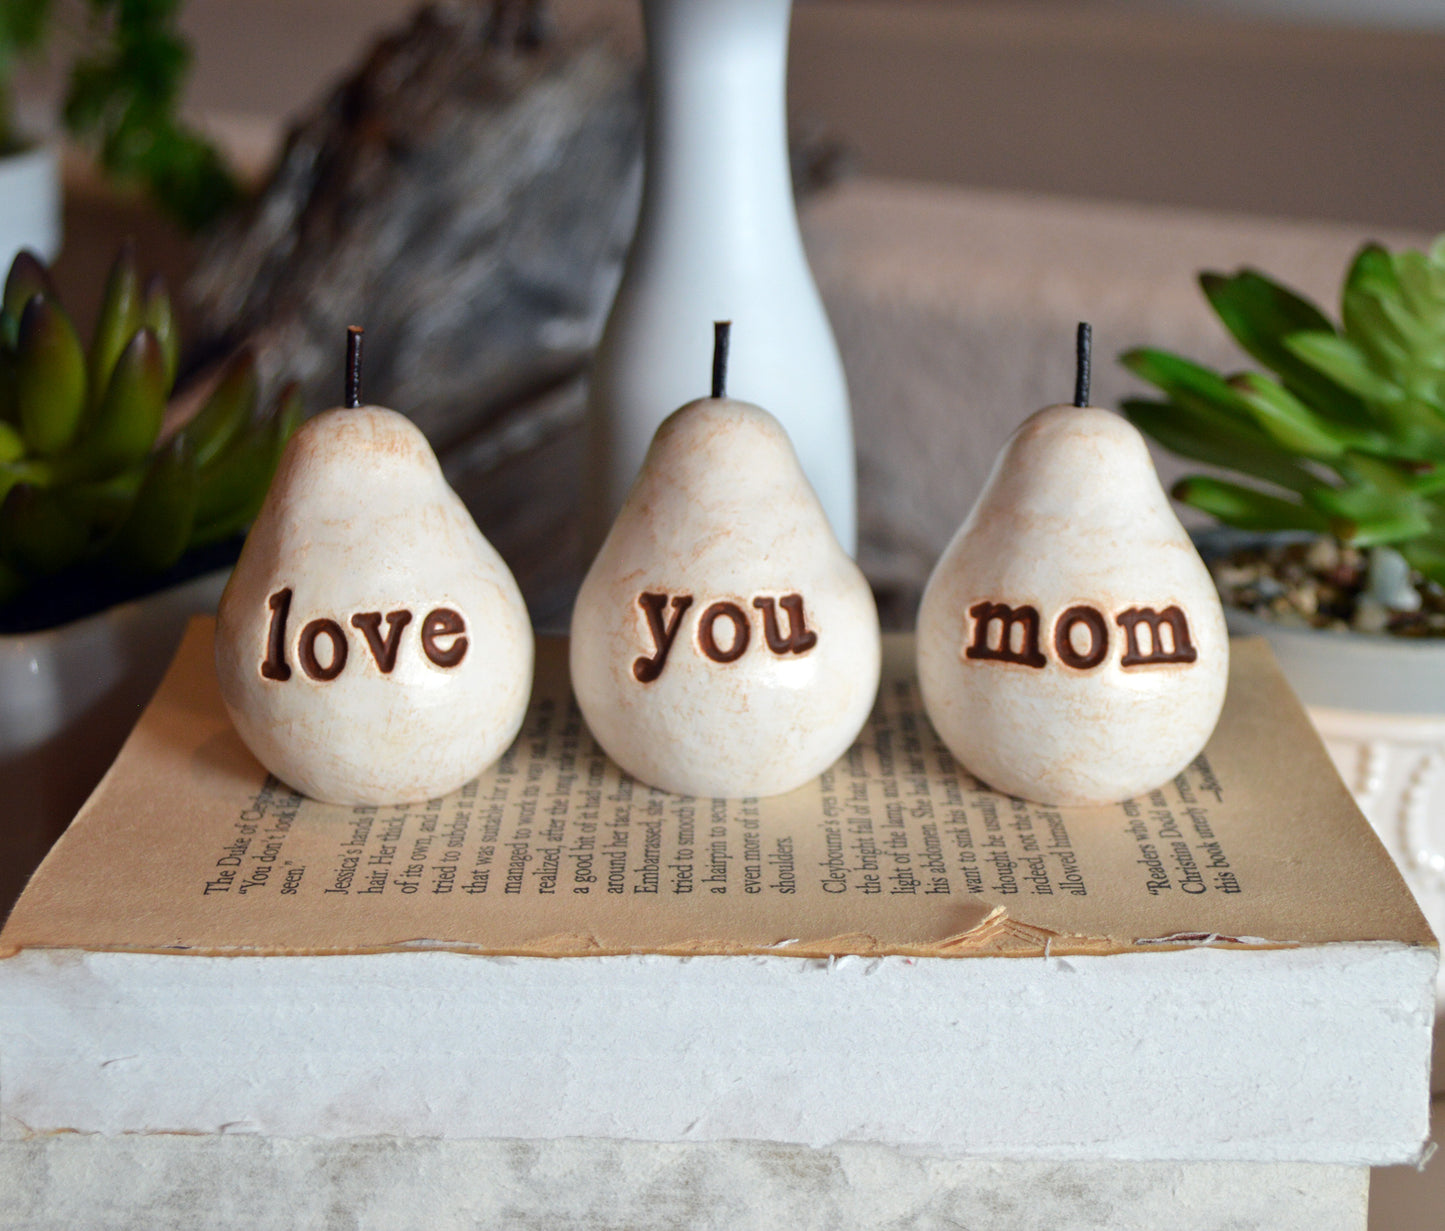 Gift for mom / Mother's Day gift for mothers / 3 white love you mom pears / FREE SHIPPING